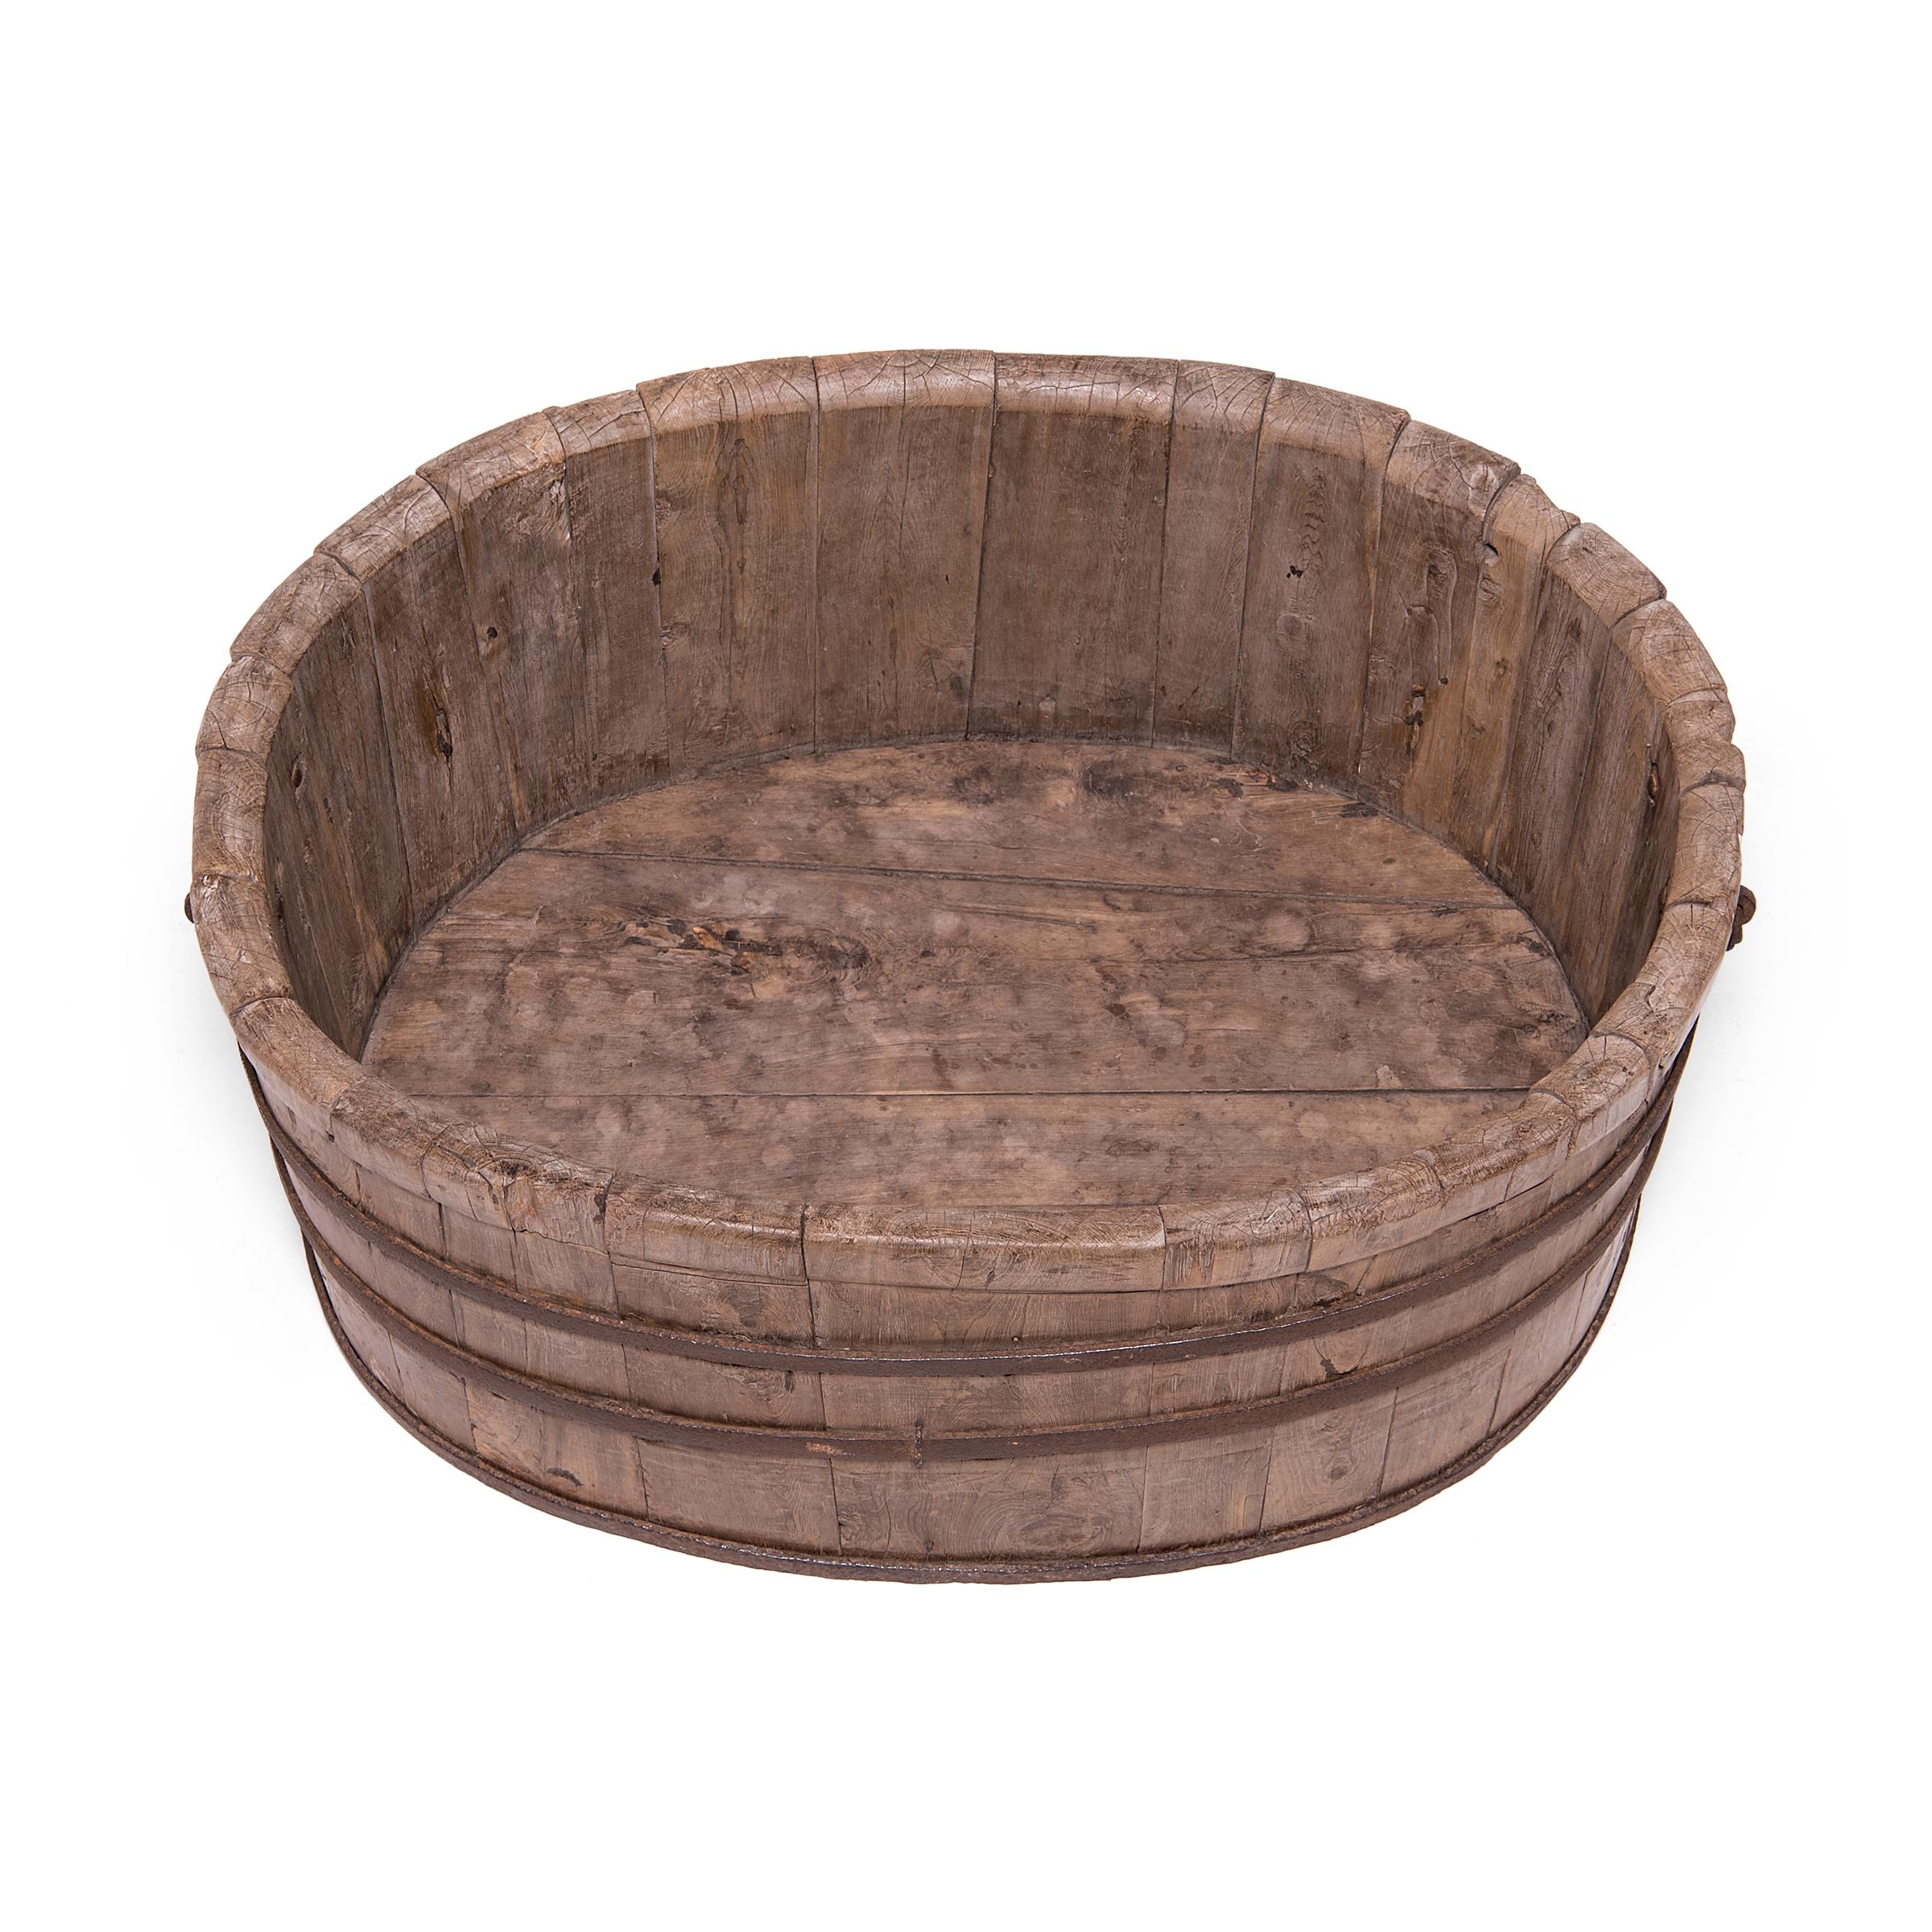 With its grand scale and perfect proportions, this rustic wooden bathtub is true showstopper. The tub has an elongated, oval shape is comprised of thick cypress wood staves held together by three iron bands. Two iron handles on either side of the